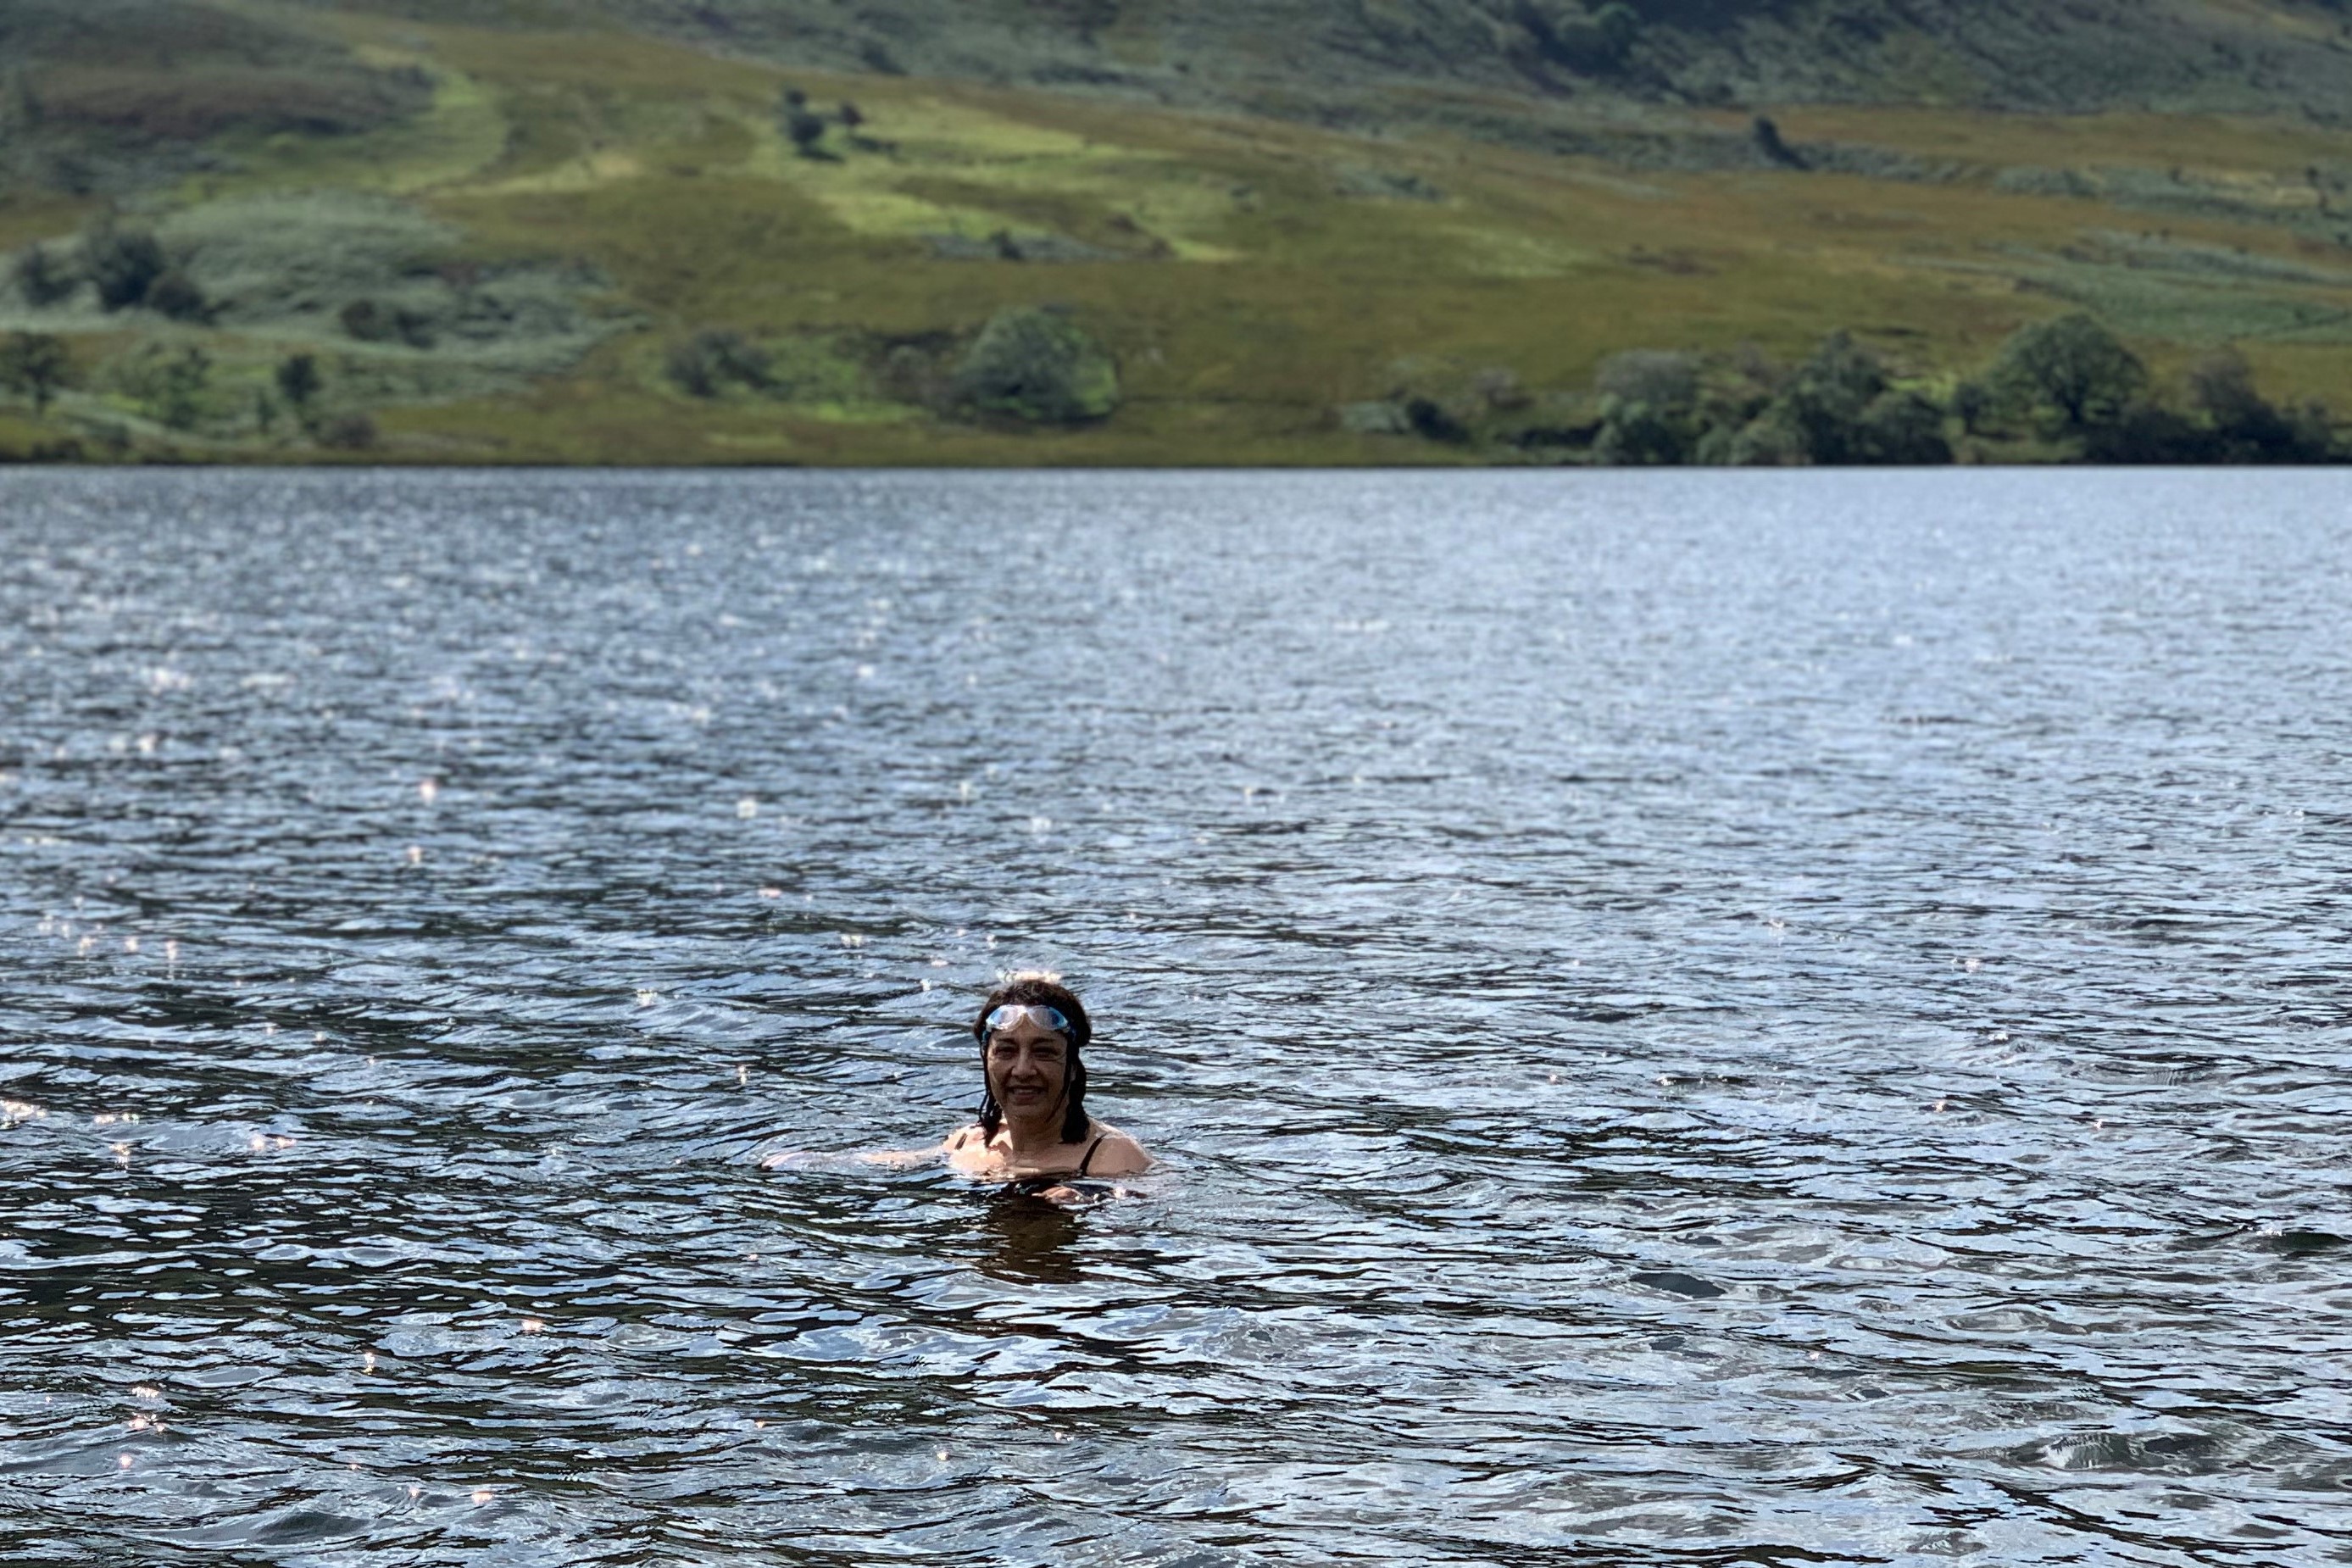 Wild Swimming Lake District | The Tranquil Otter